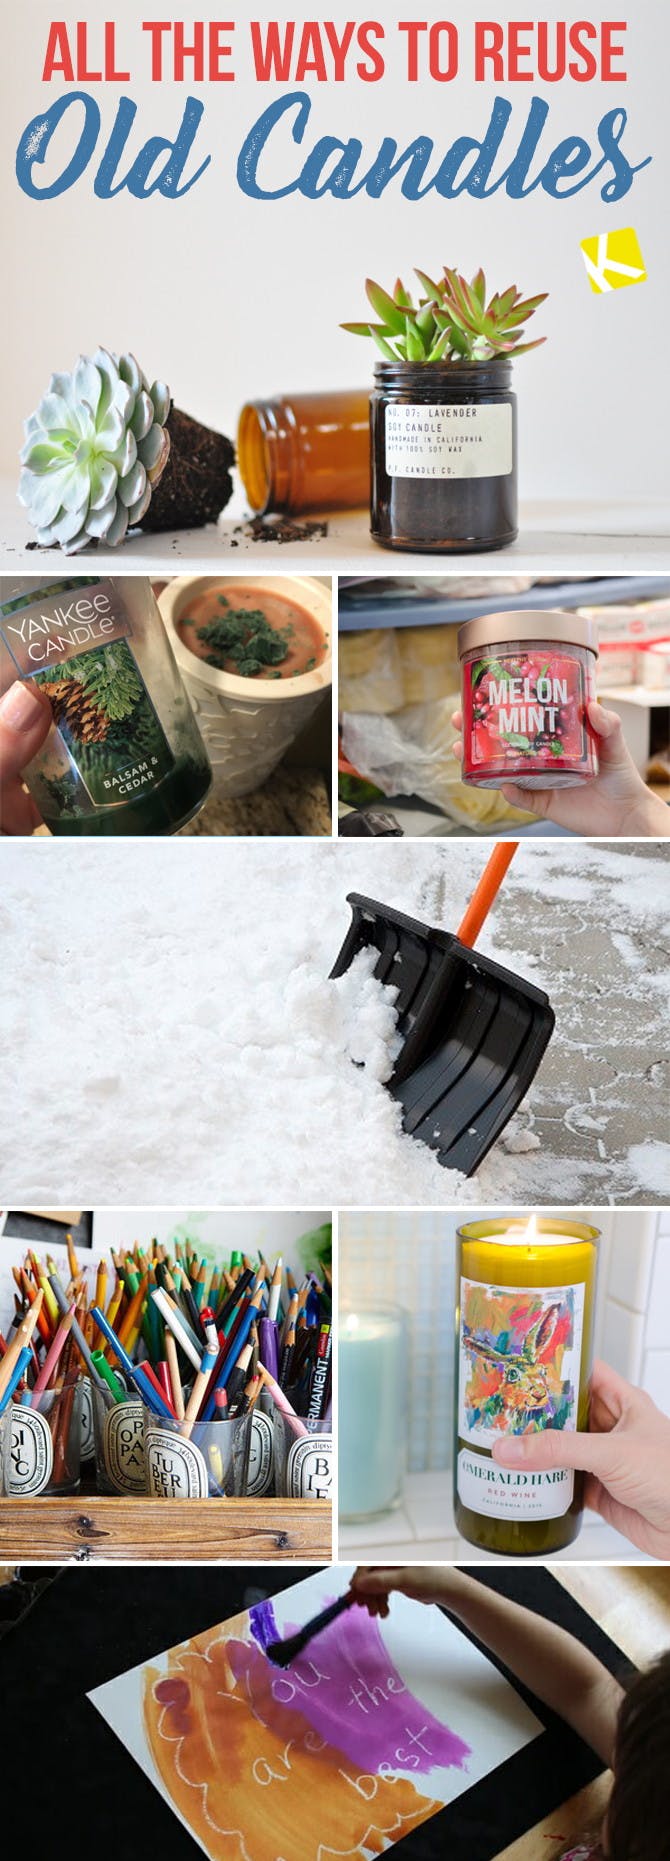 All the Ways to Reuse Old Candles